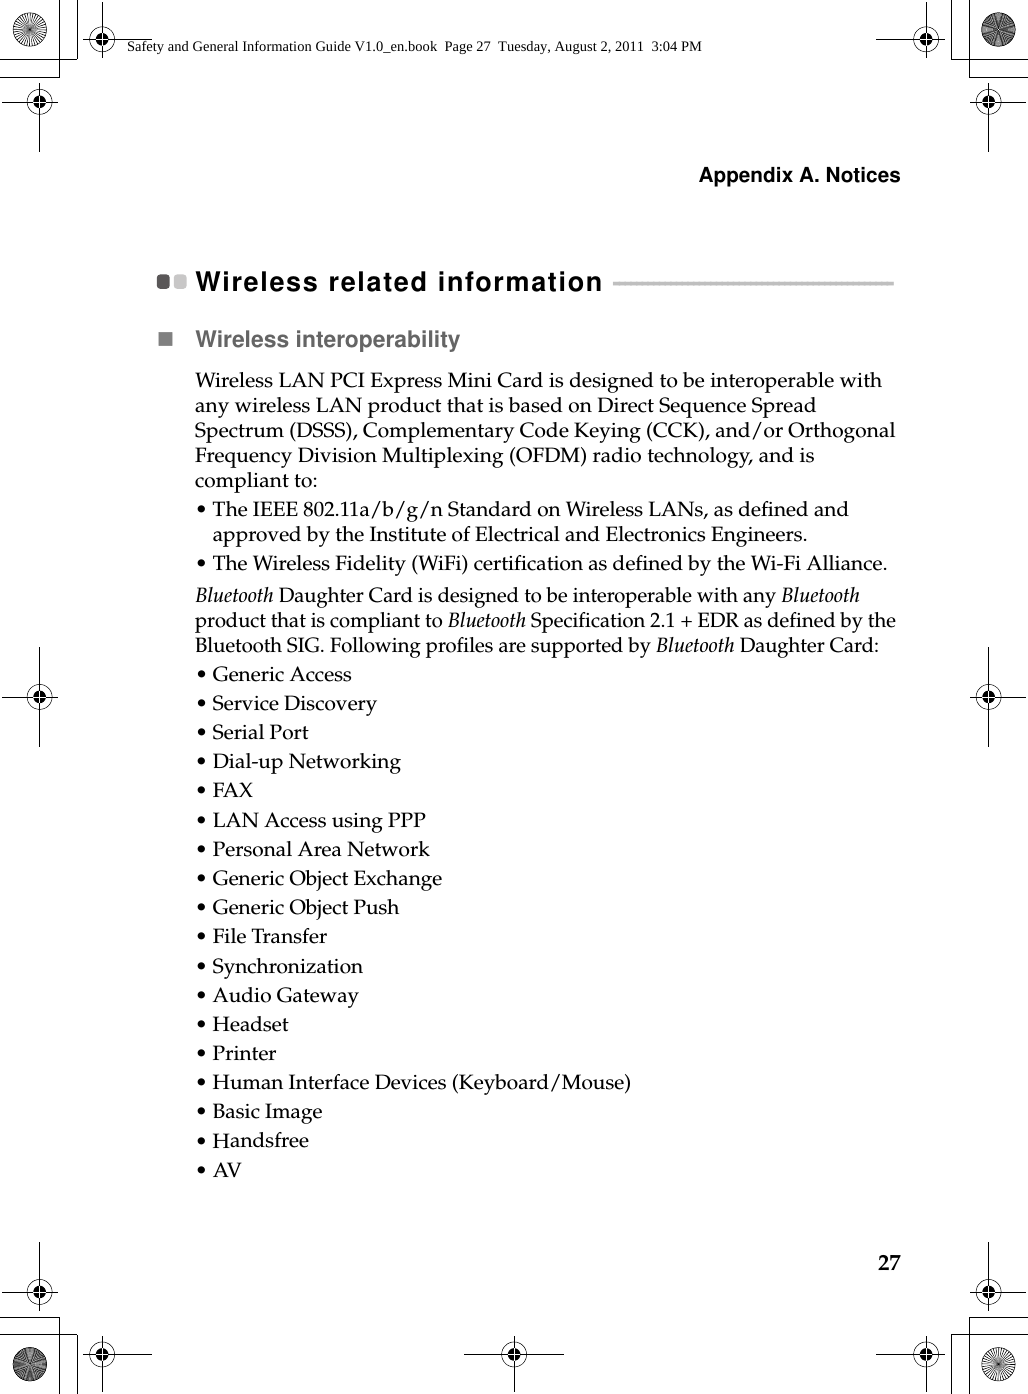 Appendix A. Notices27Wireless related information  - - - - - - - - - - - - - - - - - - - - - - - - - - - - - - - - - - - - - - - - - - - - - - - - - Wireless interoperabilityWireless LAN PCI Express Mini Card is designed to be interoperable with any wireless LAN product that is based on Direct Sequence Spread Spectrum (DSSS), Complementary Code Keying (CCK), and/or Orthogonal Frequency Division Multiplexing (OFDM) radio technology,  a nd is compliant to:•The IEEE 802.11a/b/g/n Standard on Wireless LANs, as defined and approved by the Institute of Electrical and Electronics Engineers.•The Wireless Fidelity (WiFi) certification as defined by the Wi-Fi Alliance.Bluetooth Daughter Card is designed to be interoperable with any Bluetooth product that is compliant to Bluetooth Specification 2.1 + EDR as defined by the Bluetooth SIG. Following profiles are supported by Bluetooth Daughter Card:•Generic Access•Service Discovery•Serial Port•Dial-up Networking•FAX • LAN Access using PPP•Personal Area Network •Generic Object Exchange•Generic Object Push•File Transfer•Synchronization•Audio Gateway•Headset •Printer•Human Interface Devices (Keyboard/Mouse)•Basic Image•Handsfree•AVSafety and General Information Guide V1.0_en.book  Page 27  Tuesday, August 2, 2011  3:04 PM